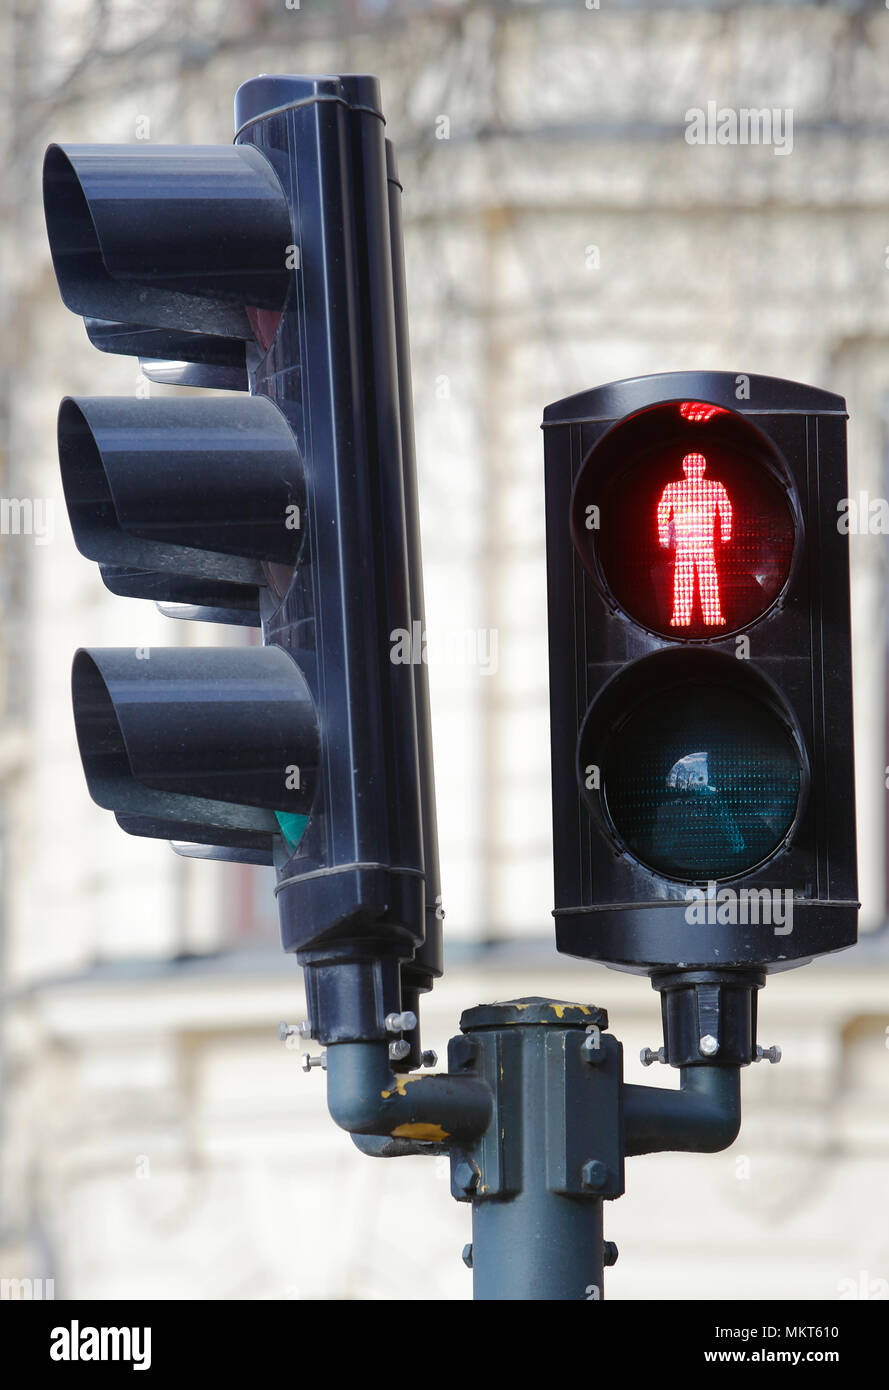 Traffic signal at the transition point showing stop for pedestrians. Stock Photo